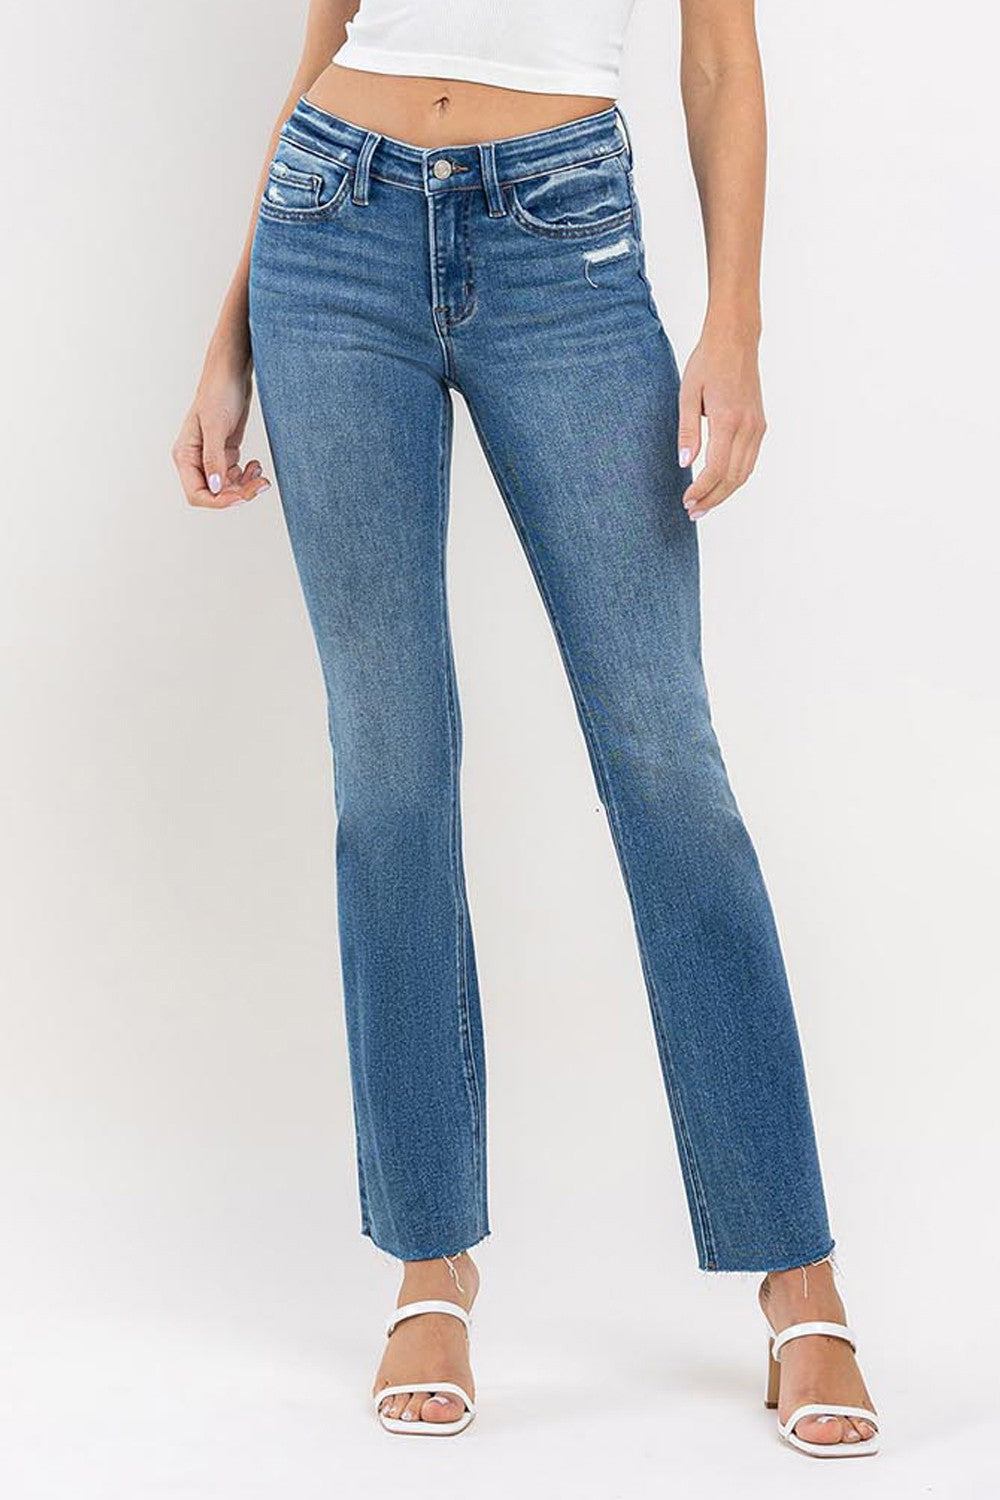 Flying Monkey Mid Rise Ankle Bootcut Jean.